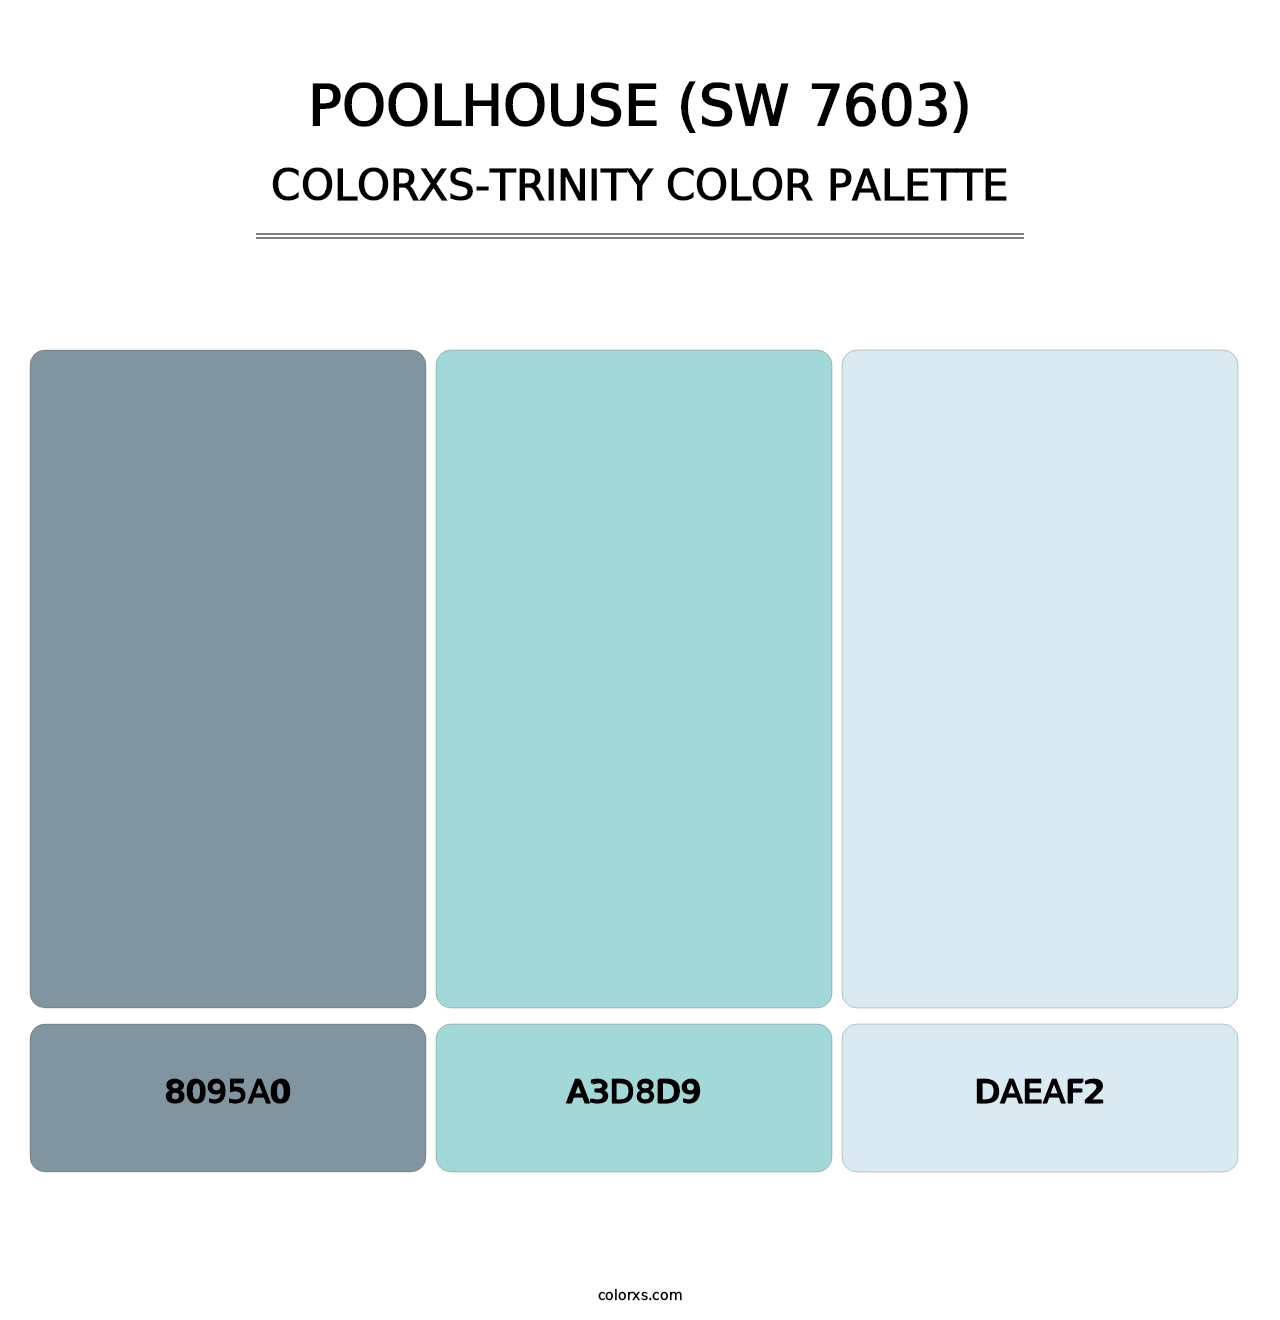 Poolhouse (SW 7603) - Colorxs Trinity Palette